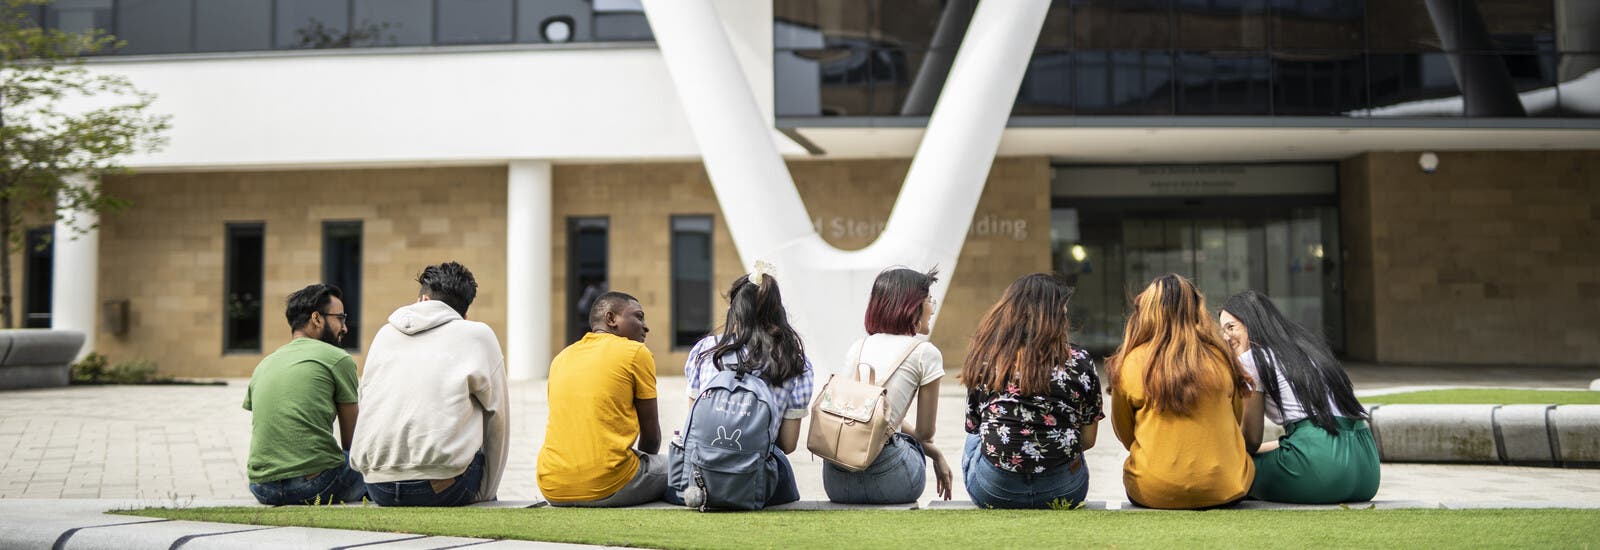 Students sitting outside campus building